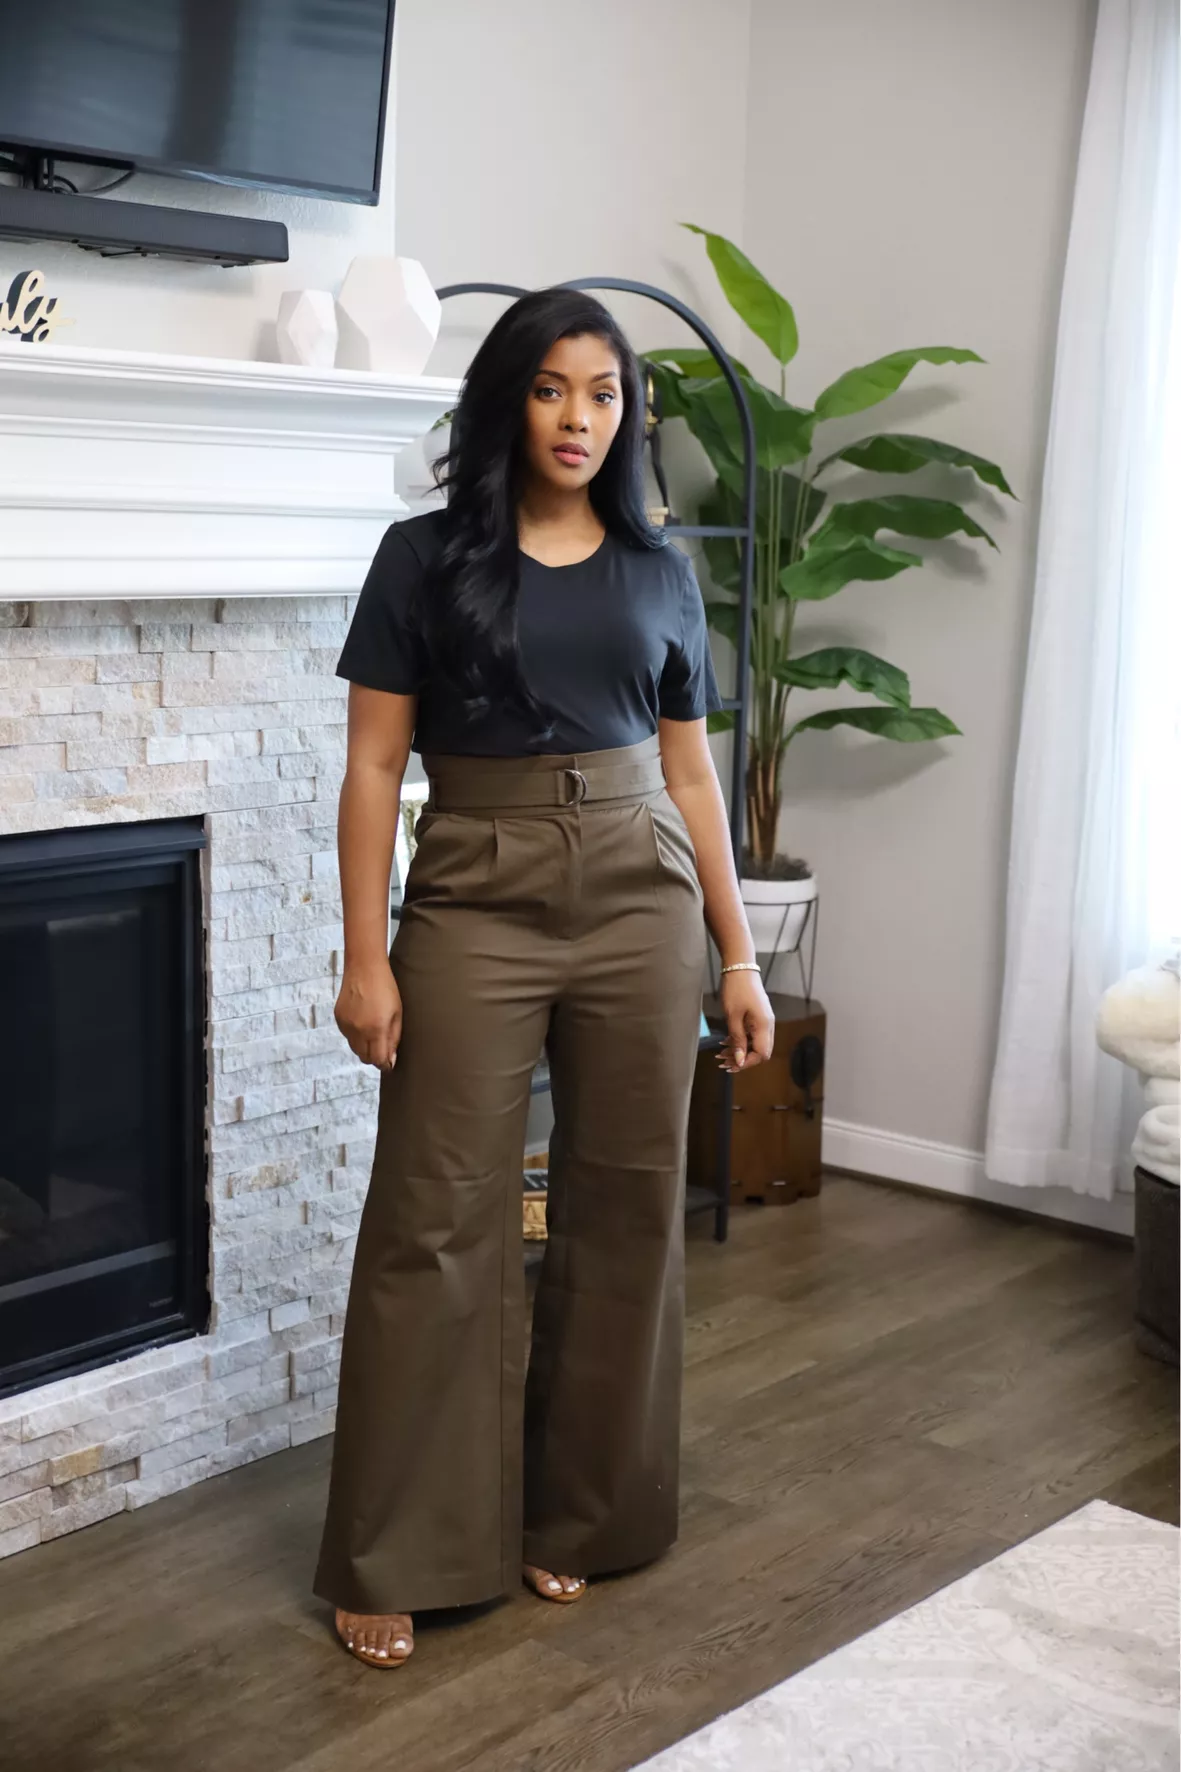 Brown Capri Pants Outfits (2 ideas & outfits)